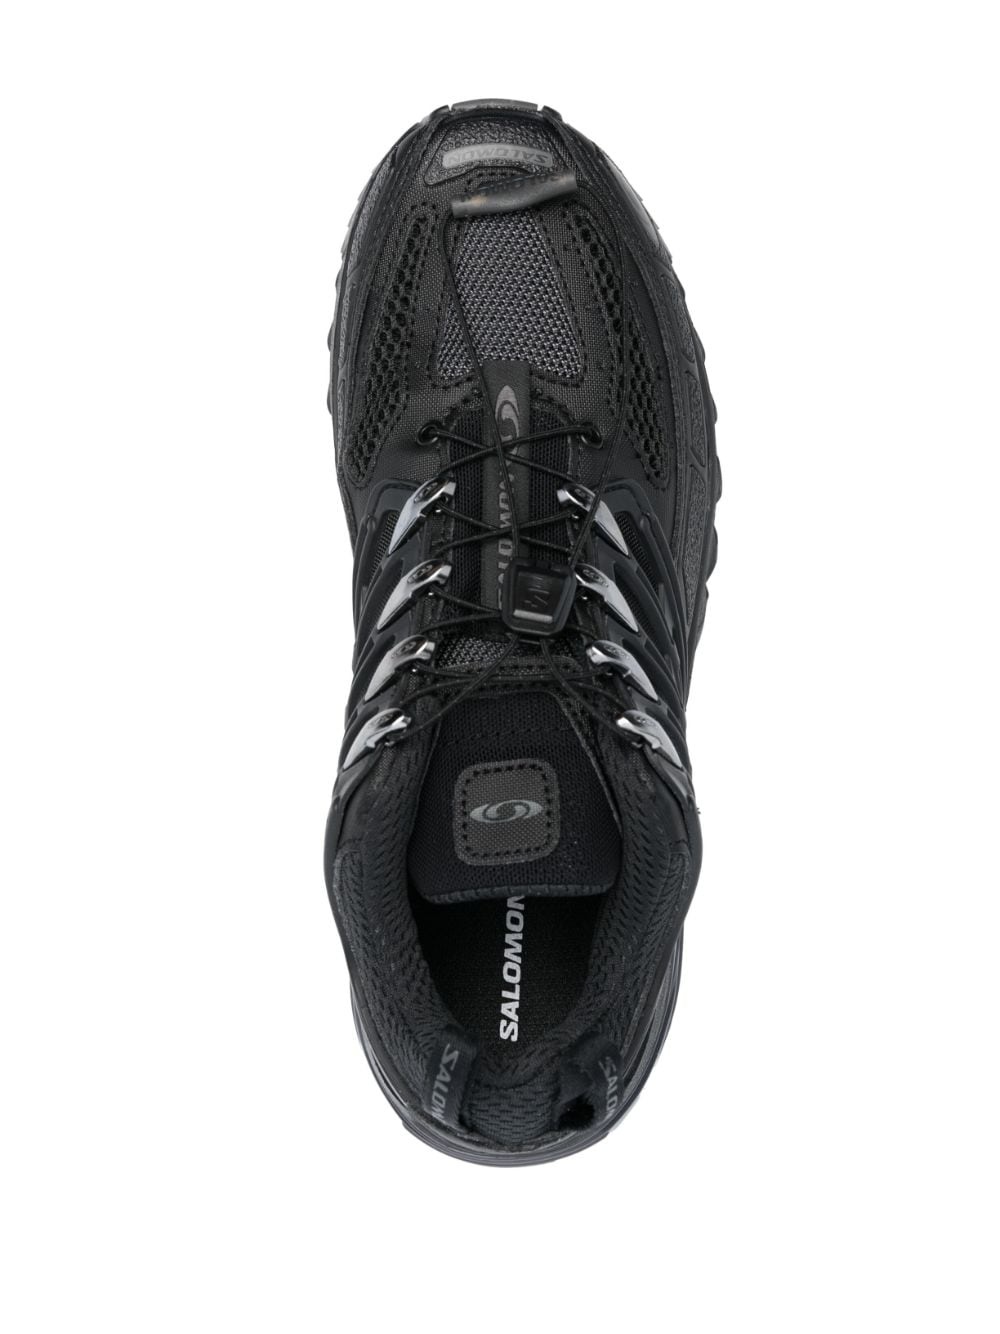 ACS Pro Advanced low-top sneakers - 4